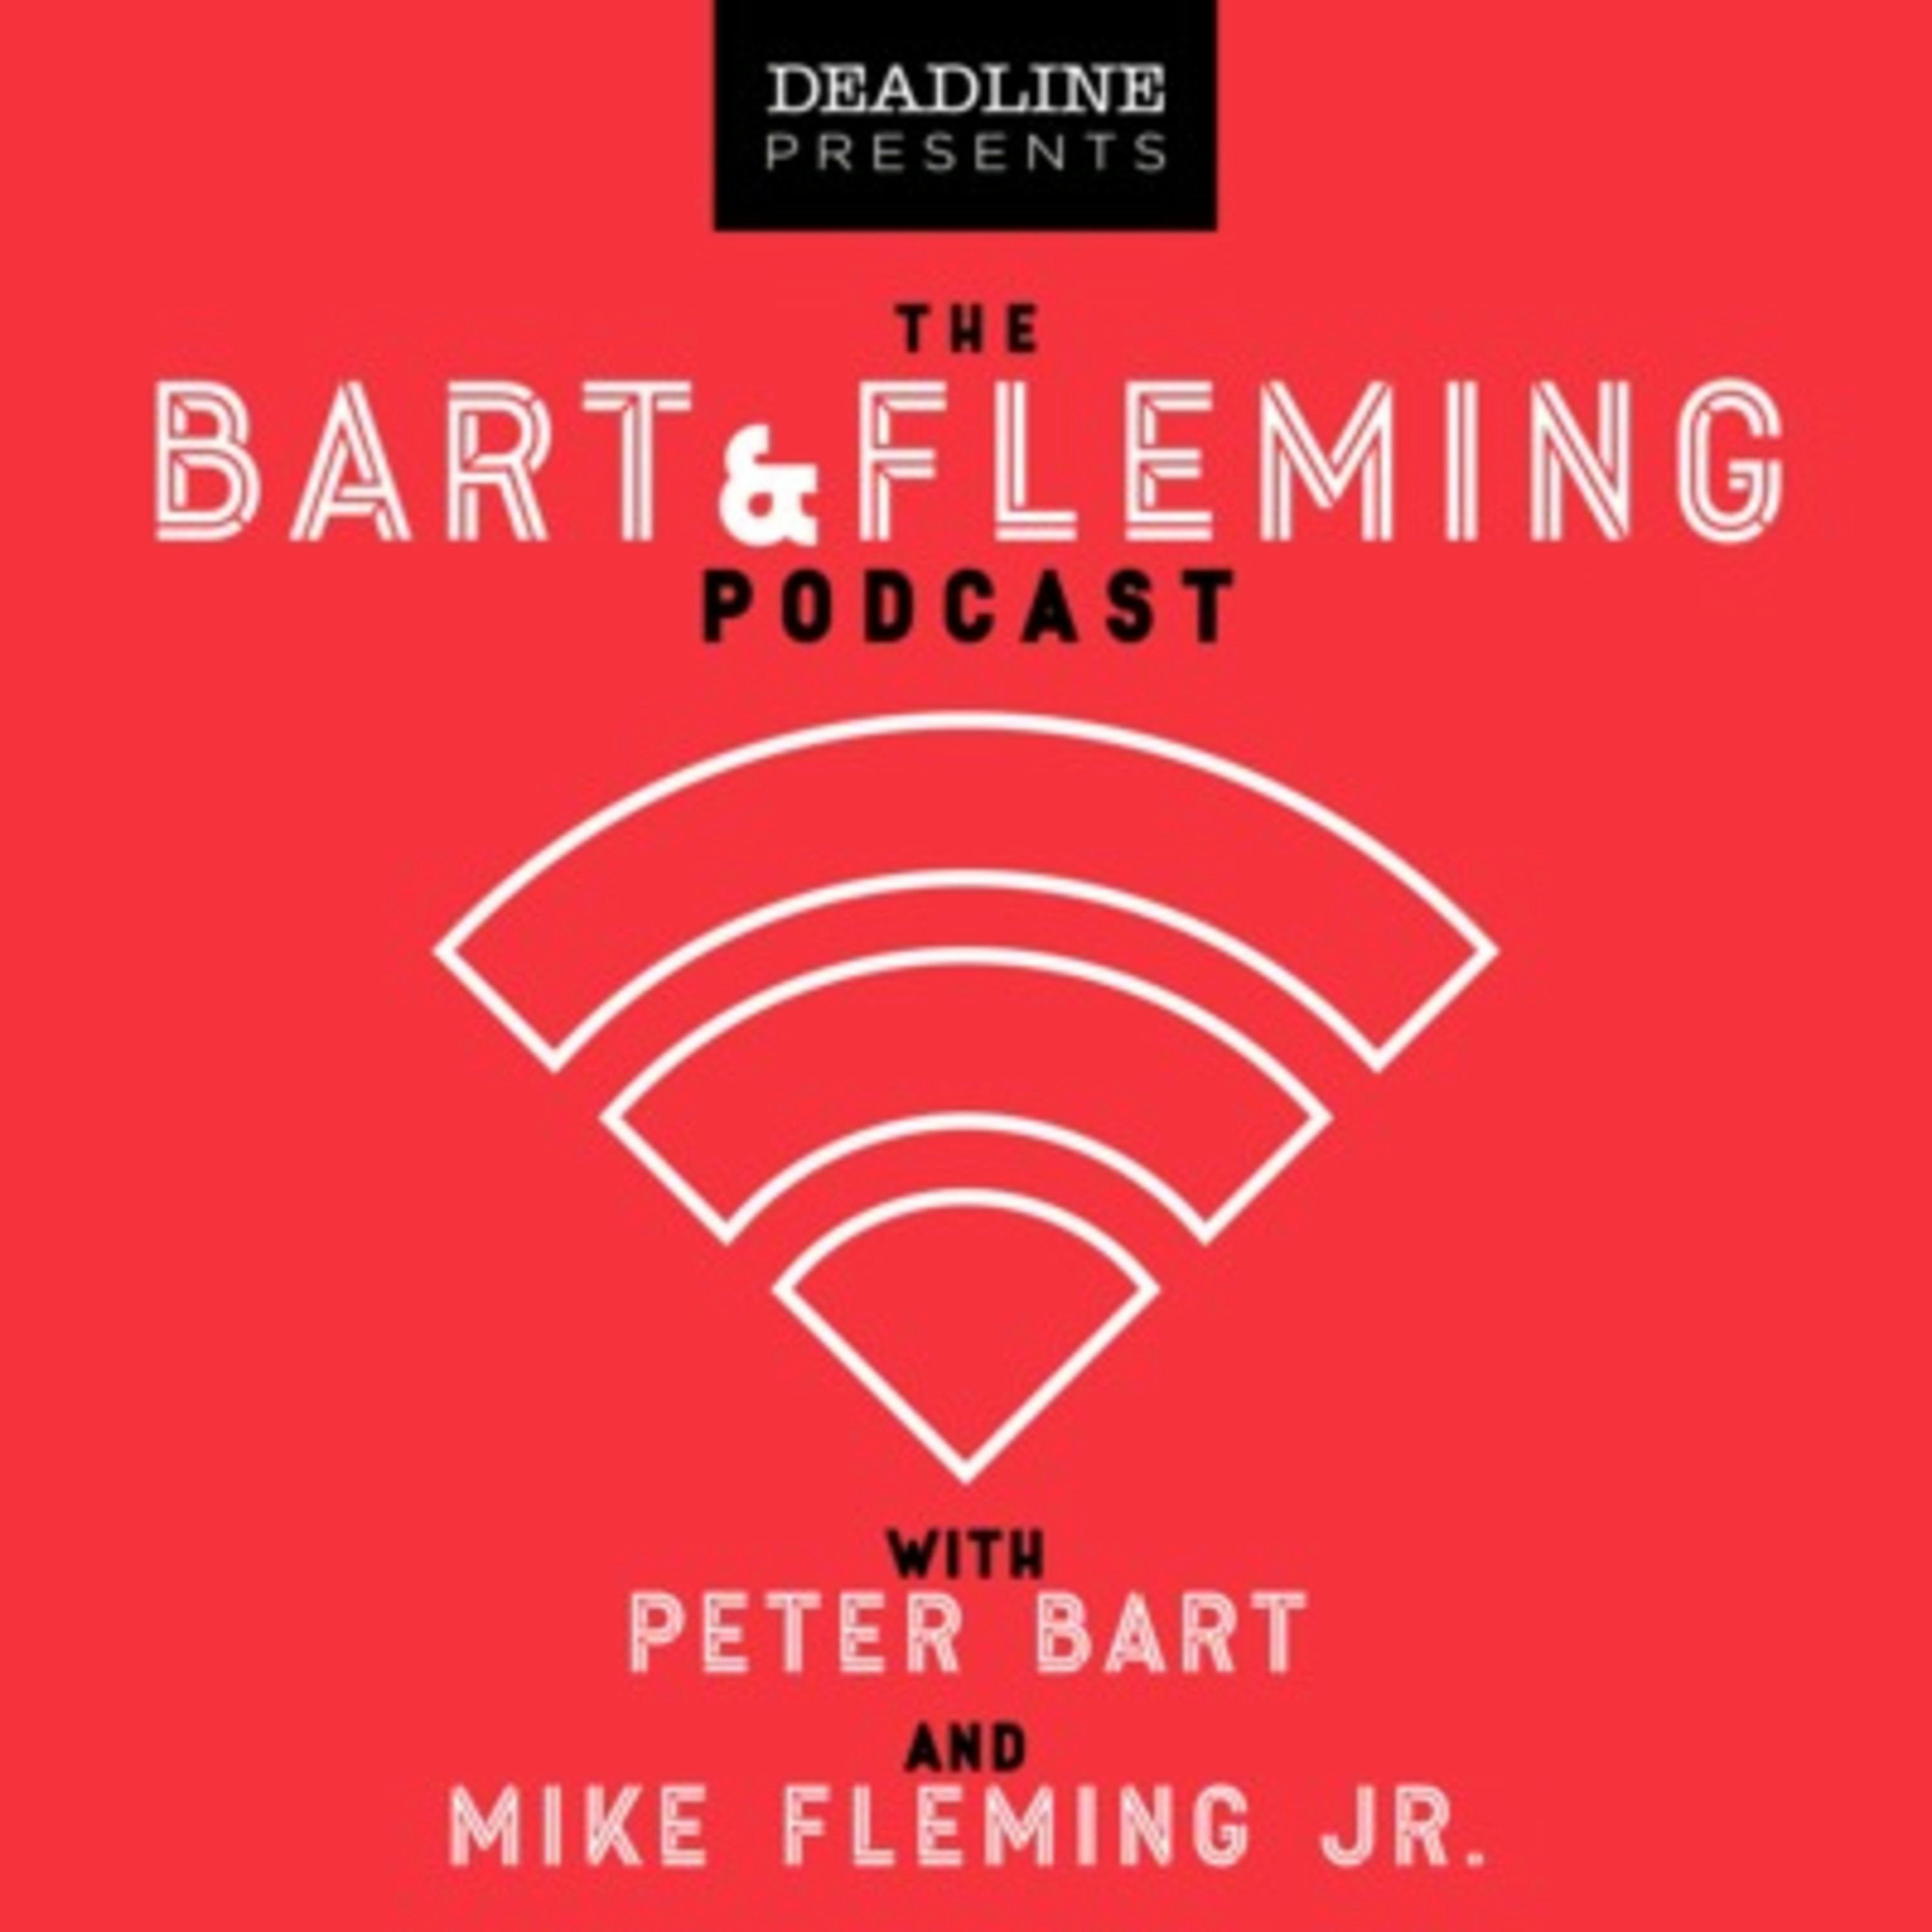 Bart & Fleming Are Back!